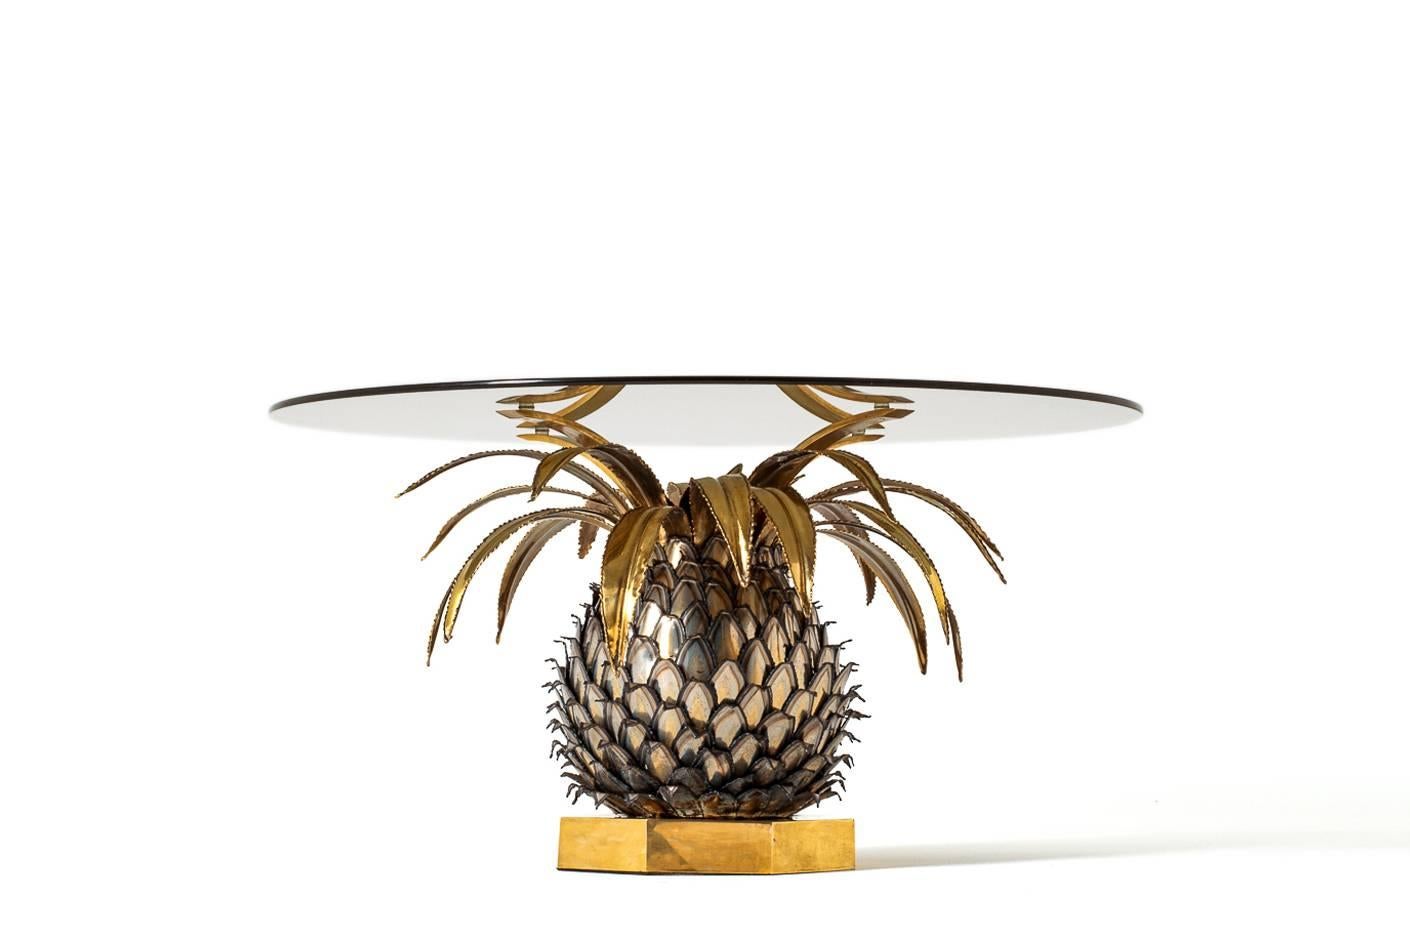 Stunning Pineapple cocktail table by Maison Jansen, France 1970. Highly decorative piece. Handcrafted from brass and metal with a beautiful natural patina. Looks great in any Luxury-Eclectic interior. In excellent condition.

